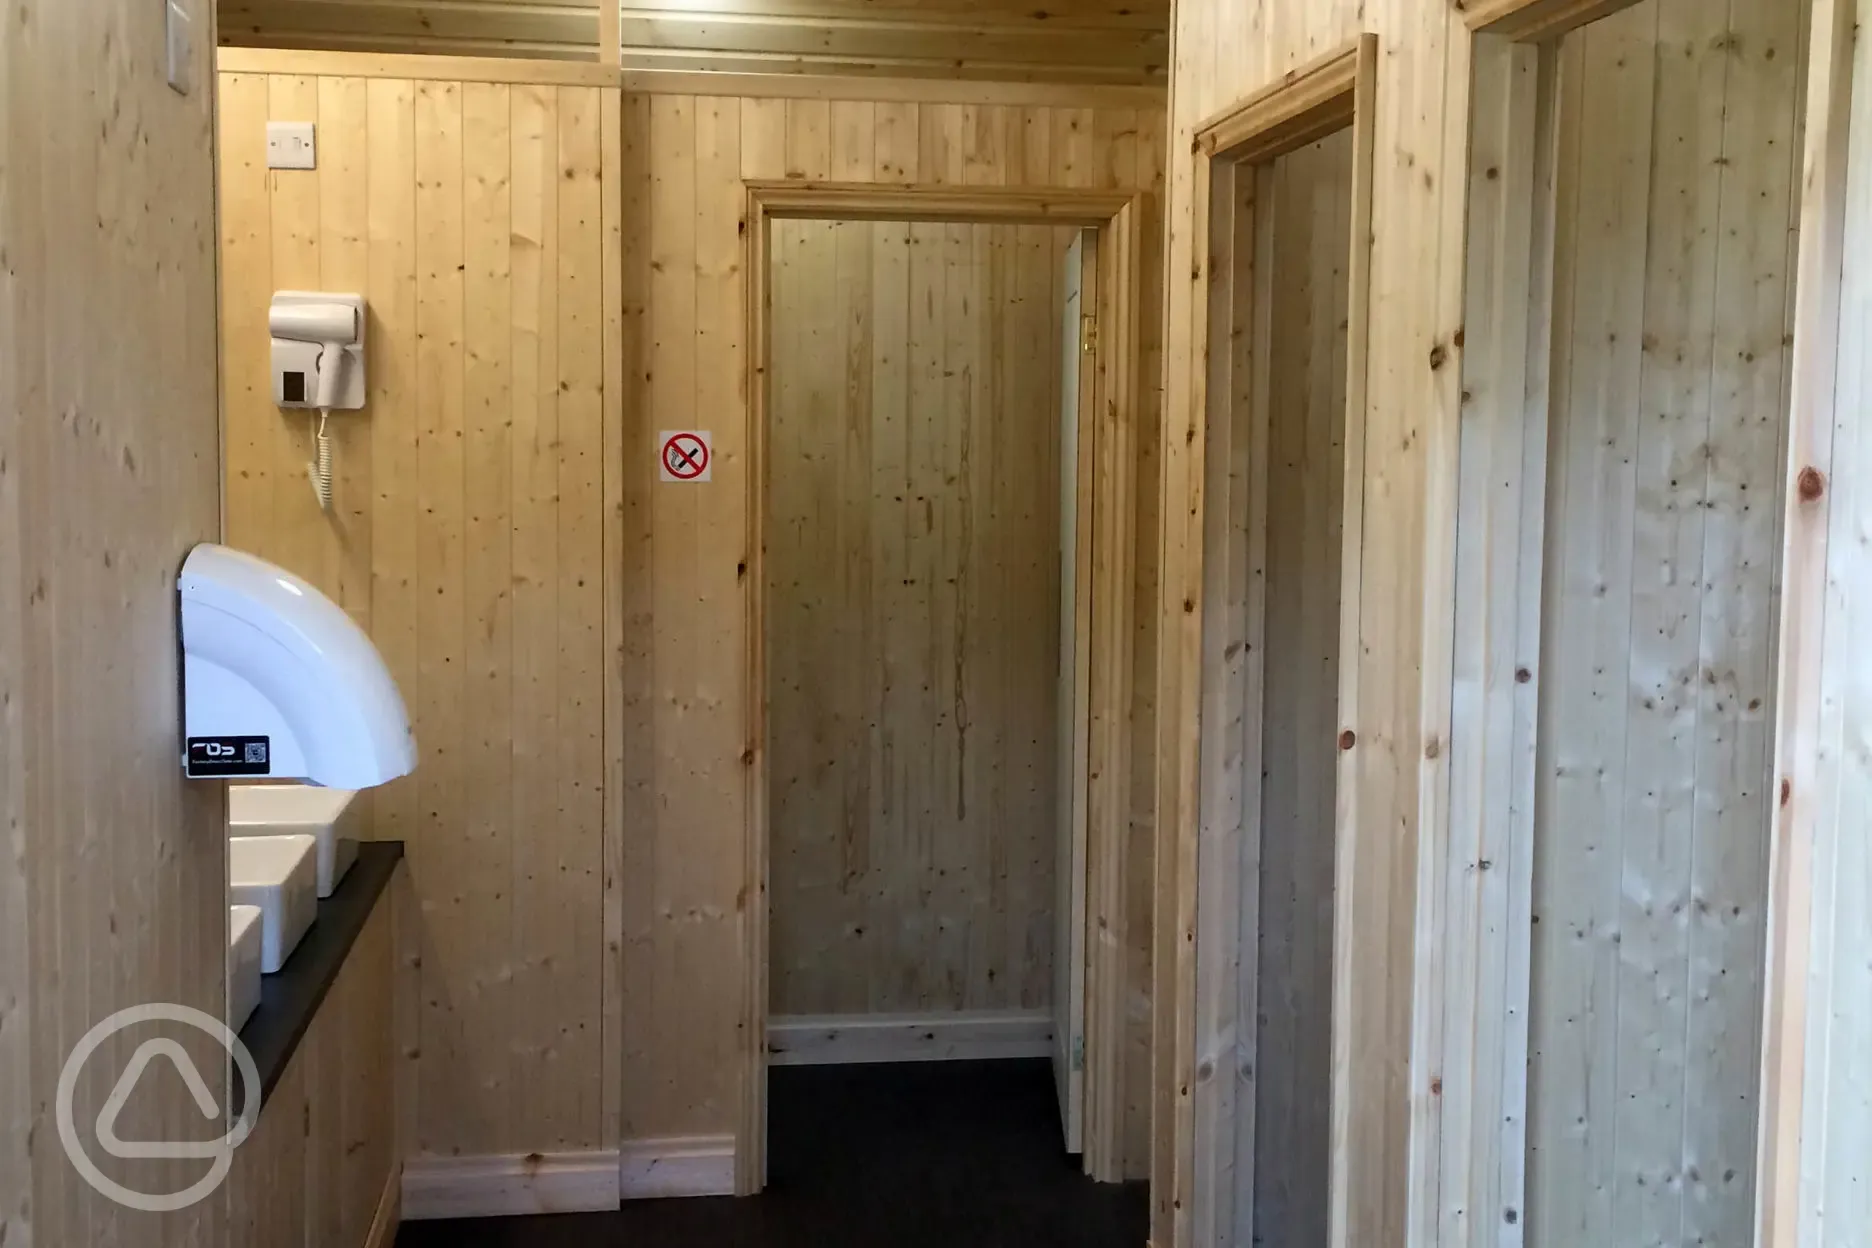 The toilet and shower facilities at Oxford Riverside Glamping are brand new for this season 